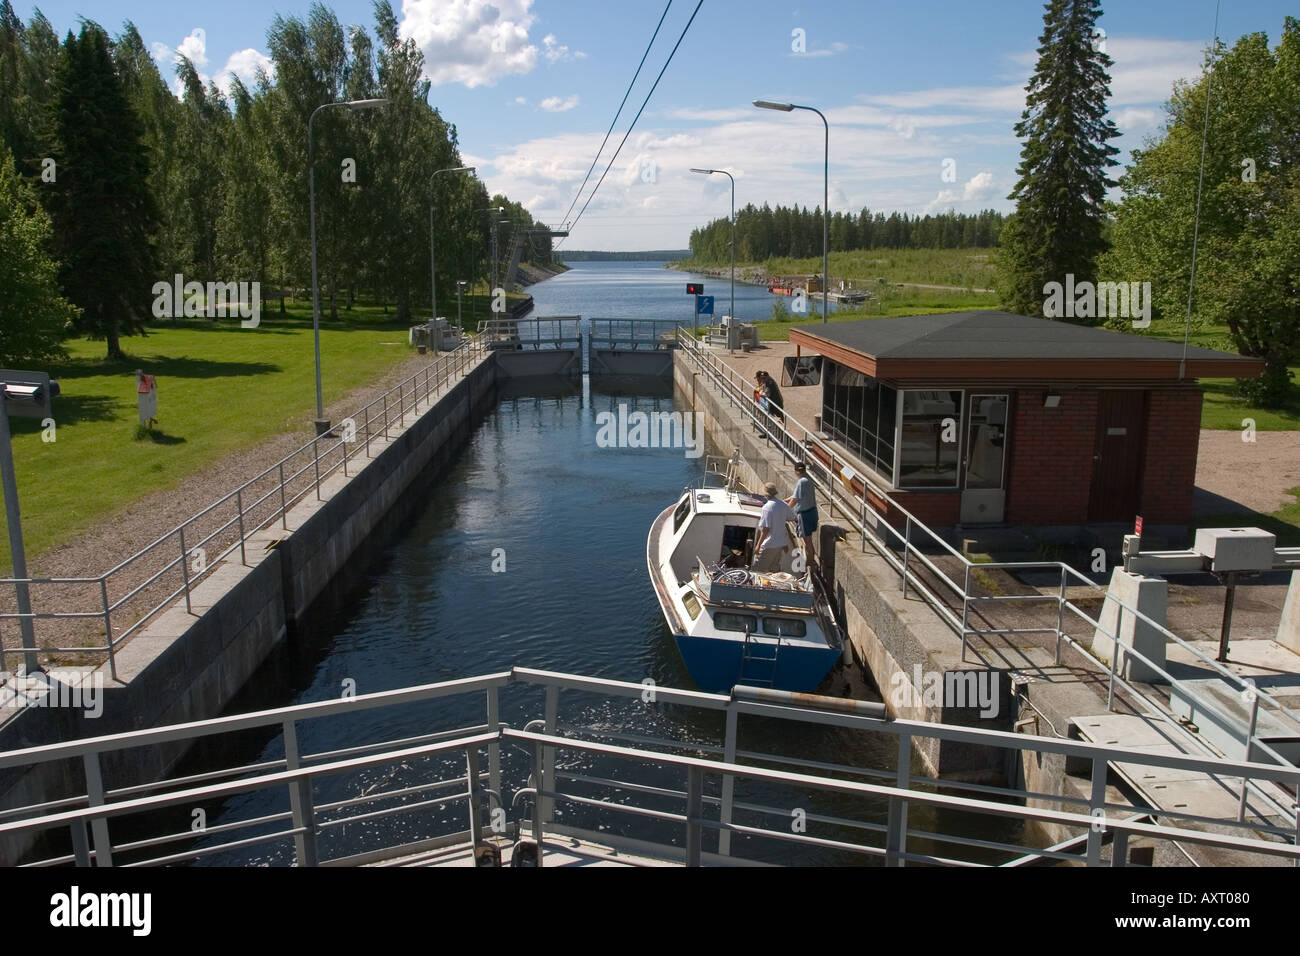 Boat at Neituri canal lock waiting for access to Lake Keitele Finland Stock Photo